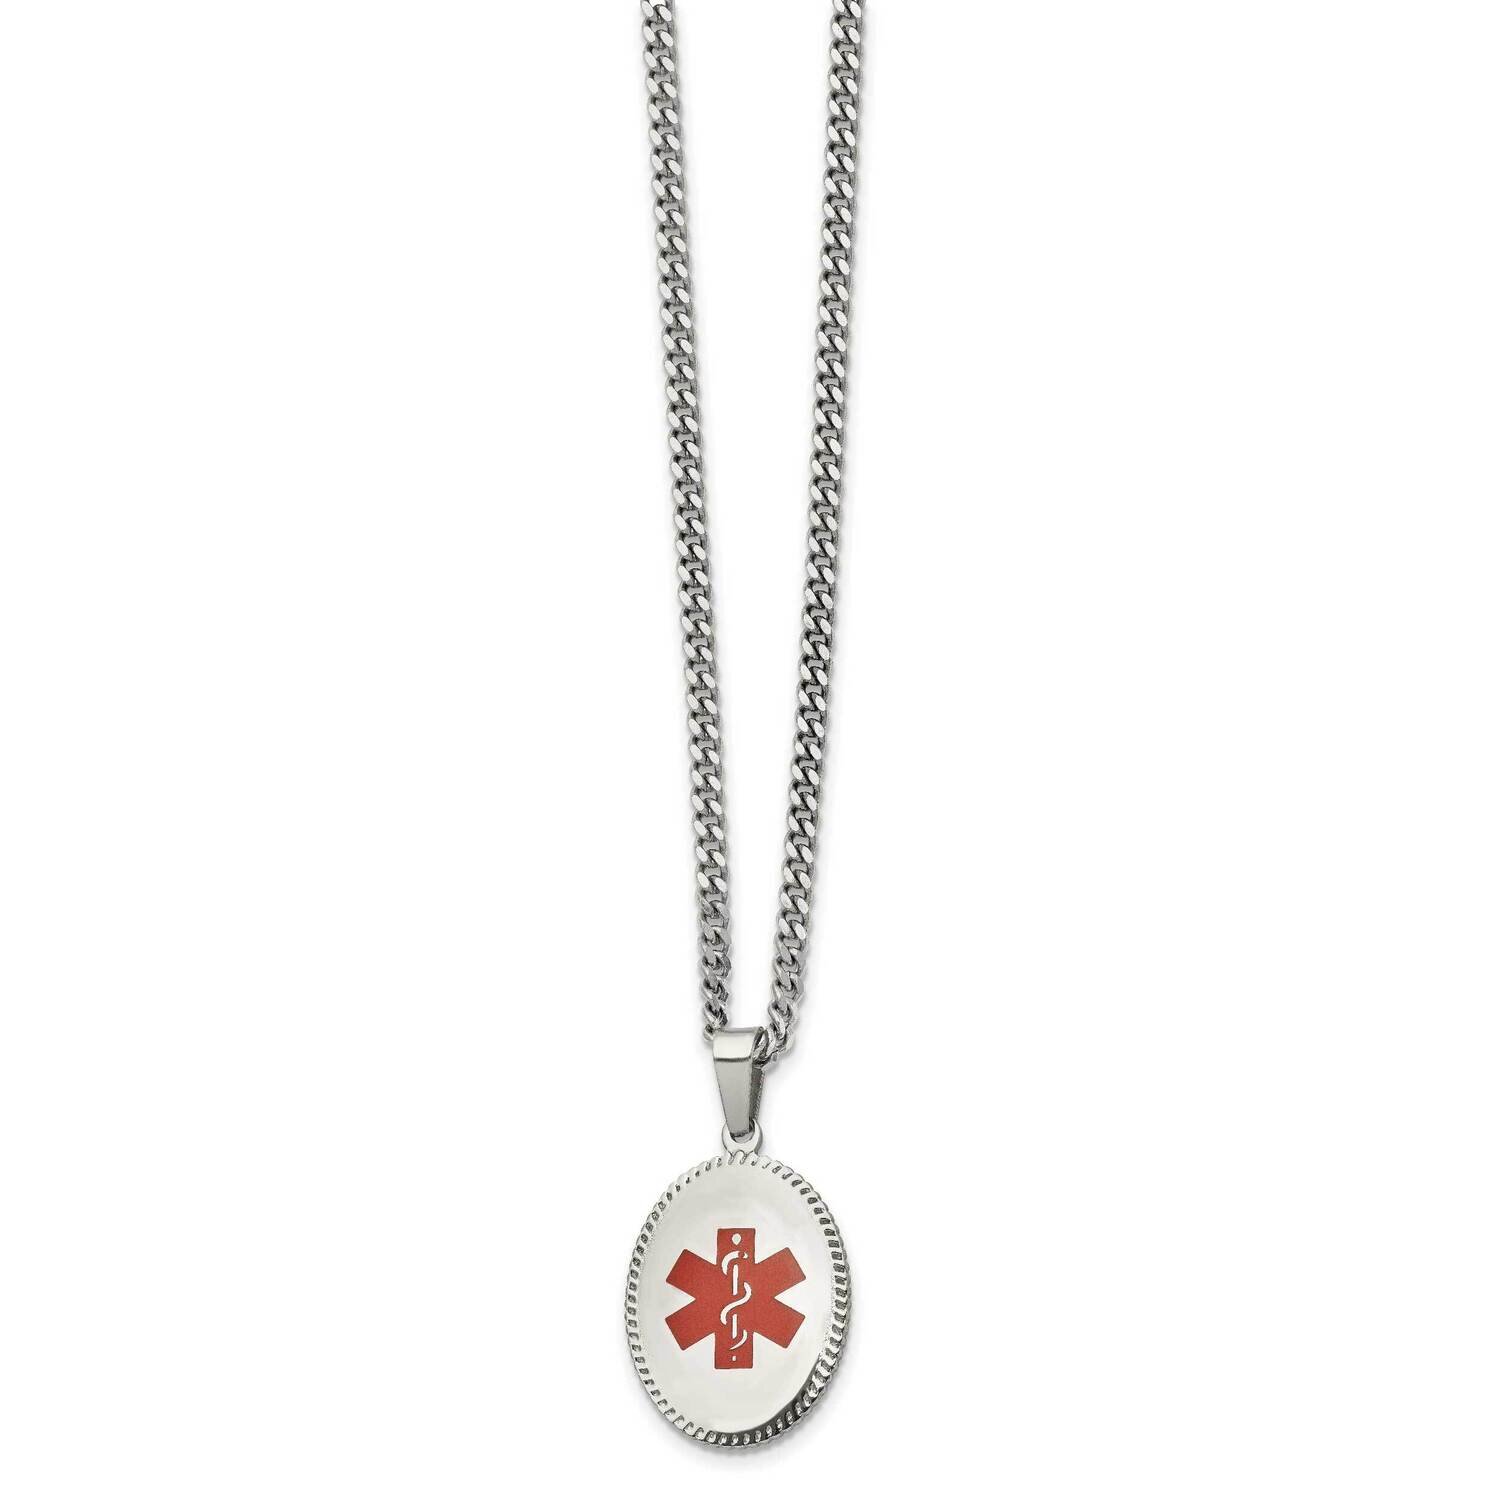 Red Enamel Oval Medical Id 20 Inch Necklace Stainless Steel Polished SRN2759-20